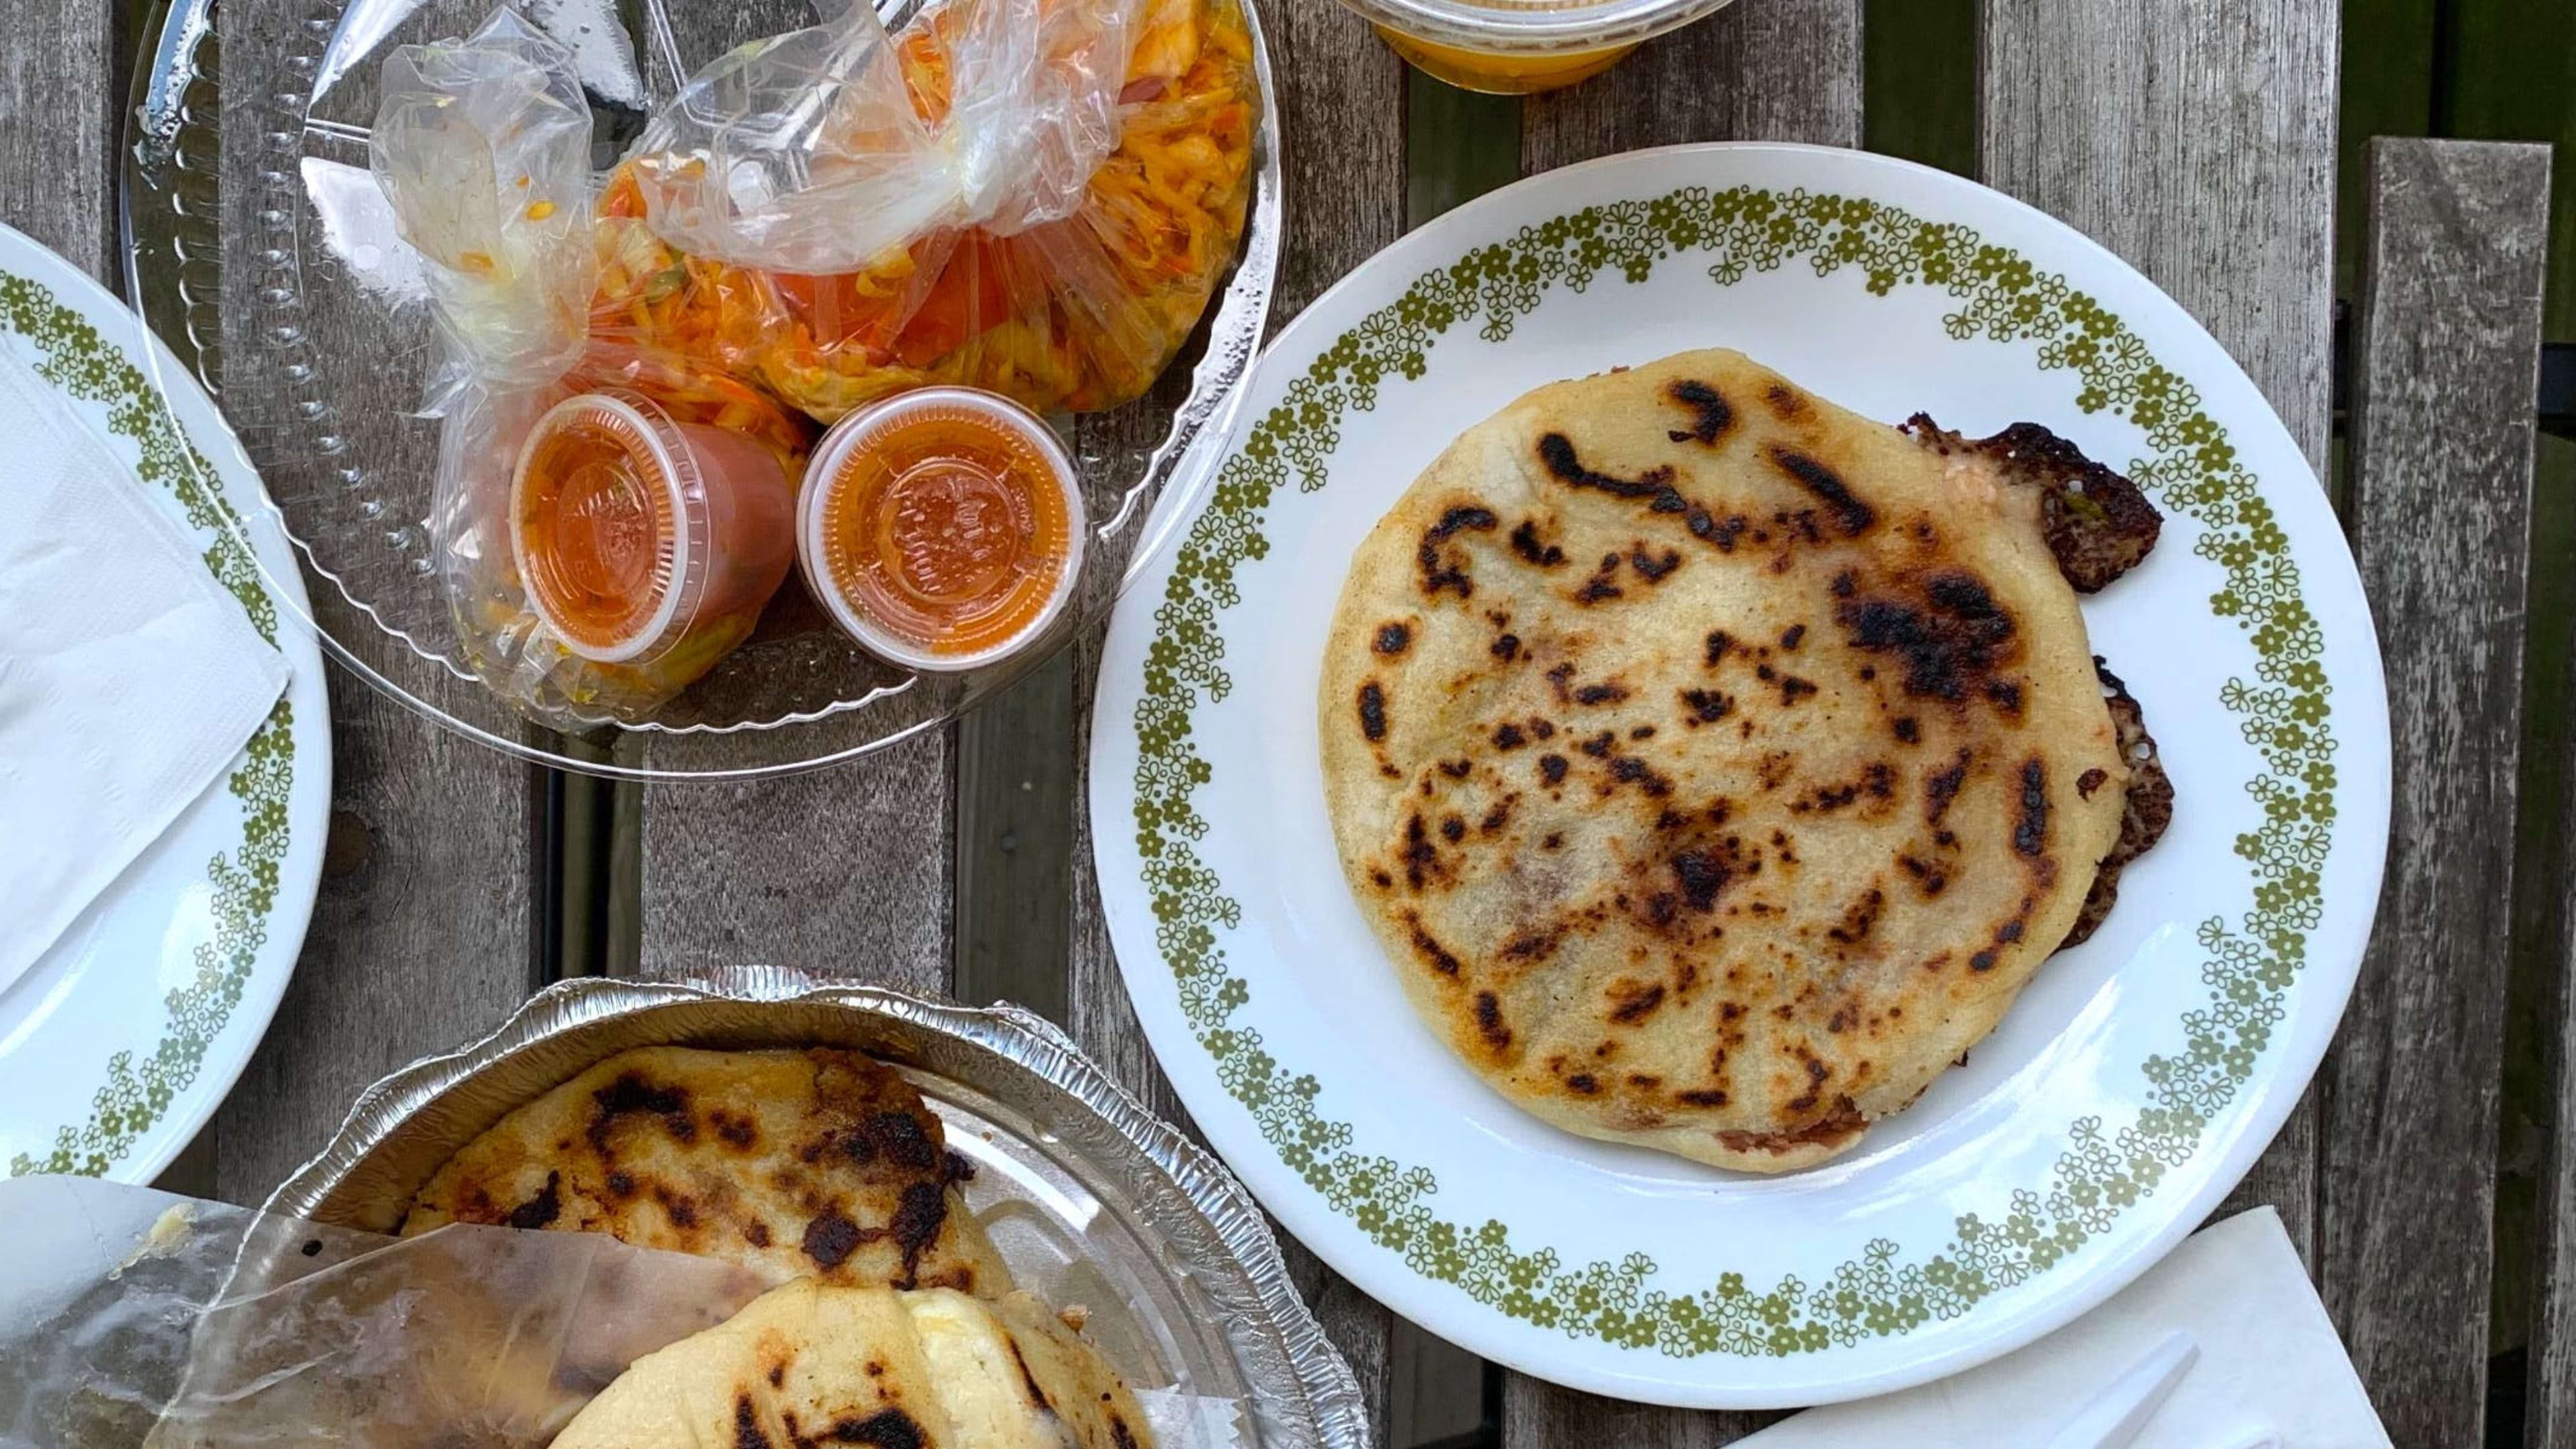 Saturday Afternoon In Ridgewood: Breweries & Pupusas feature image